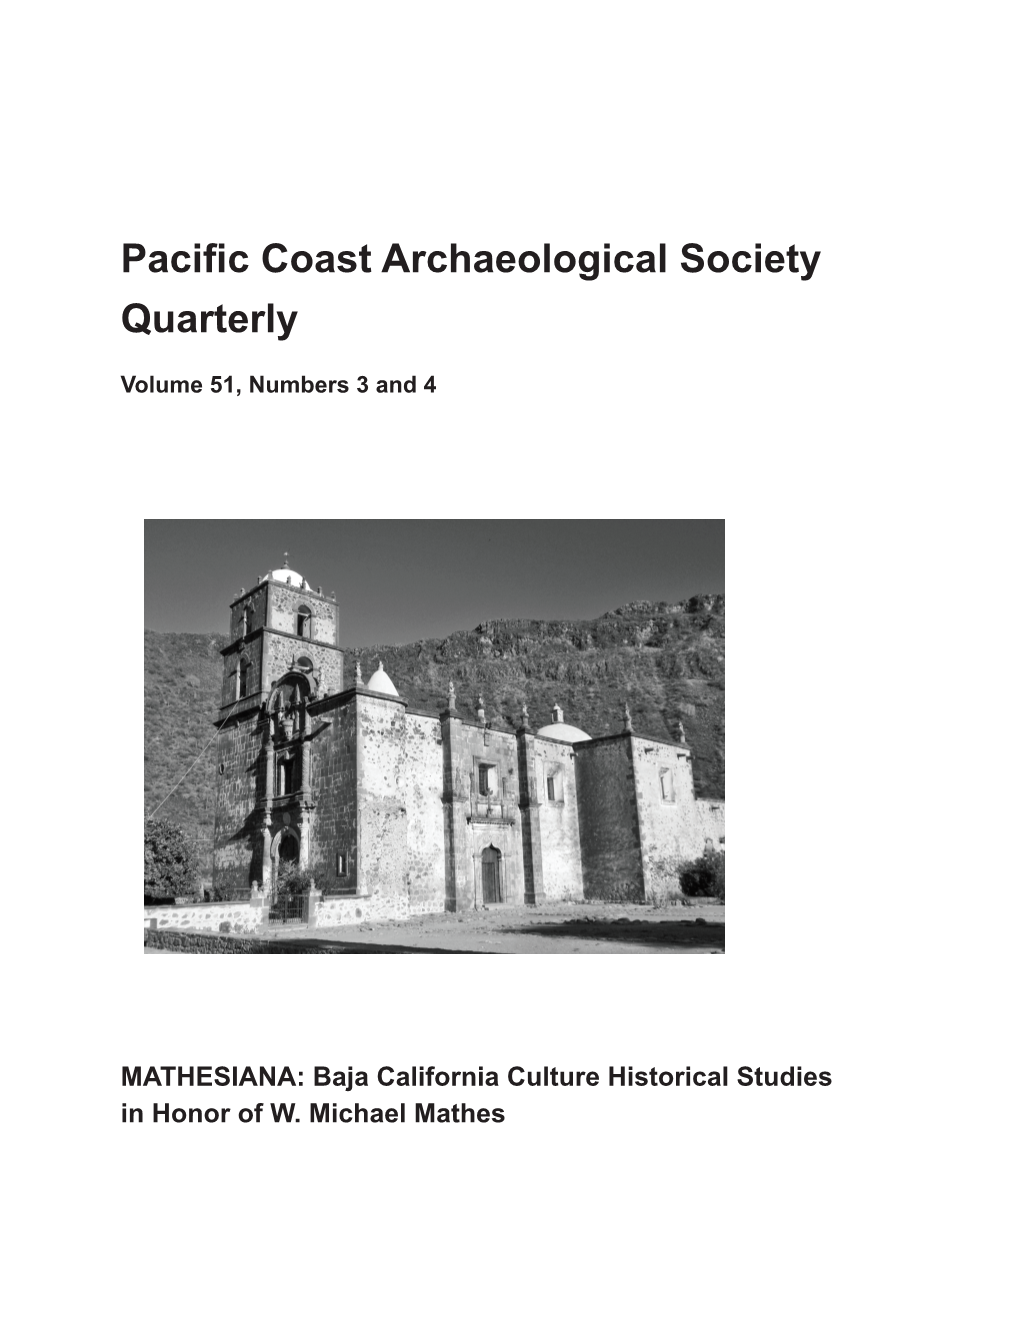 Pacific Coast Archaeological Society Quarterly